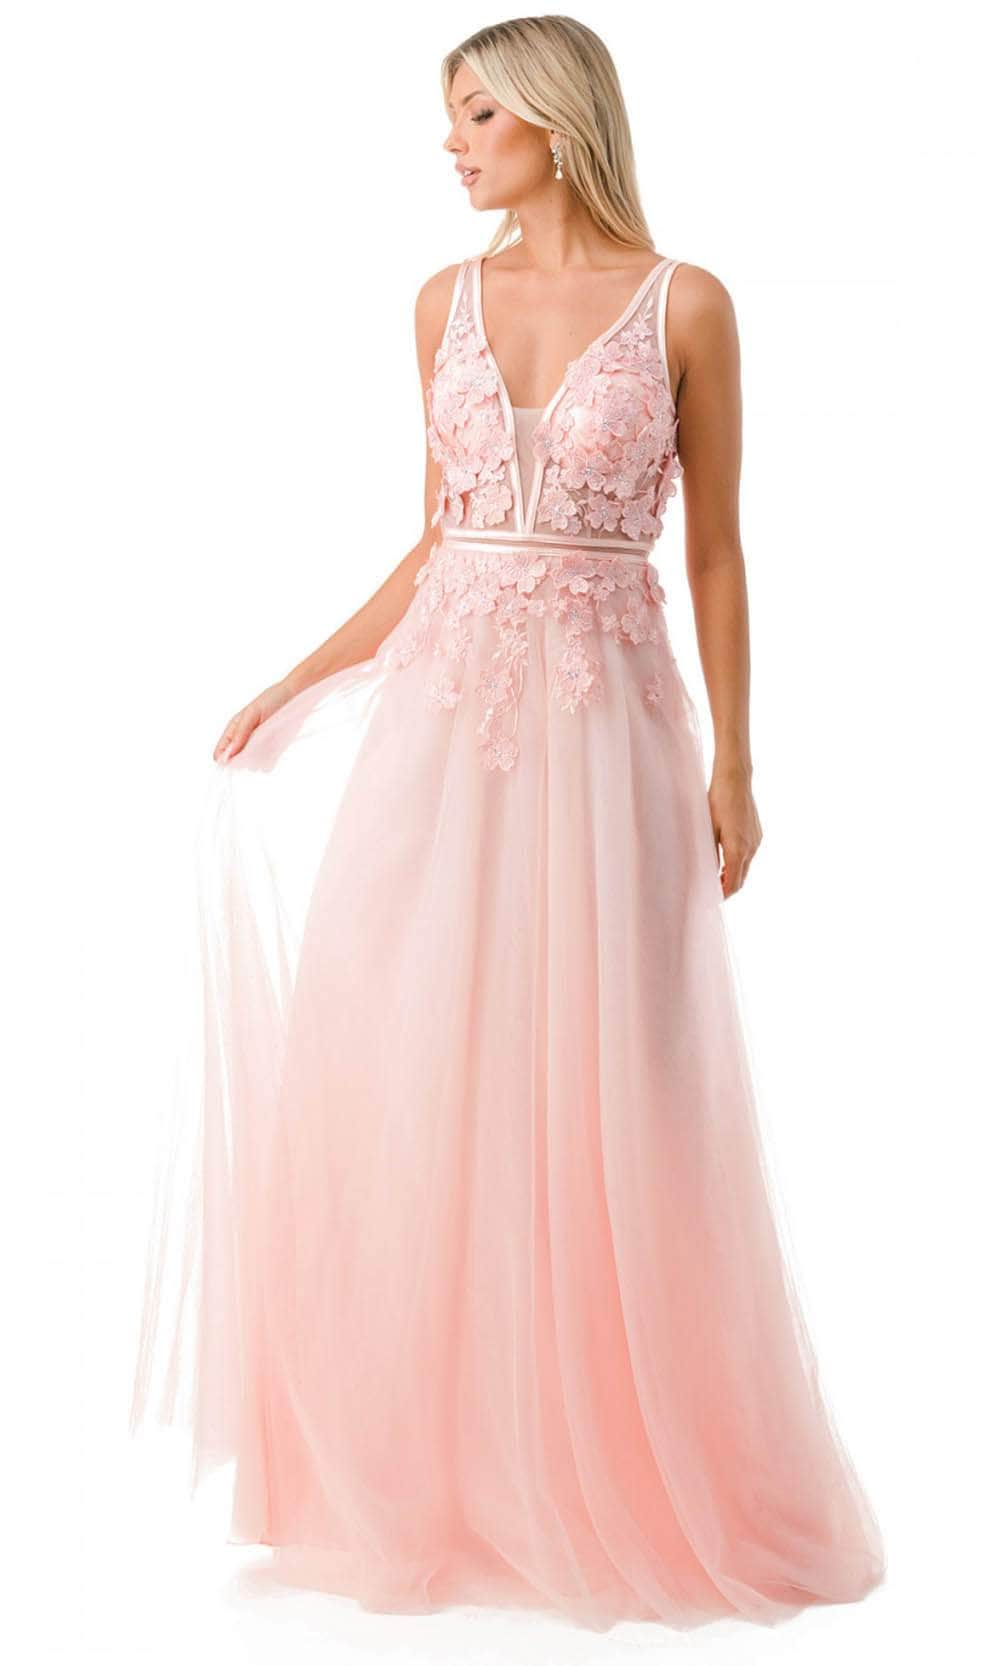 Aspeed Design P2114 - A-Line Prom Gown